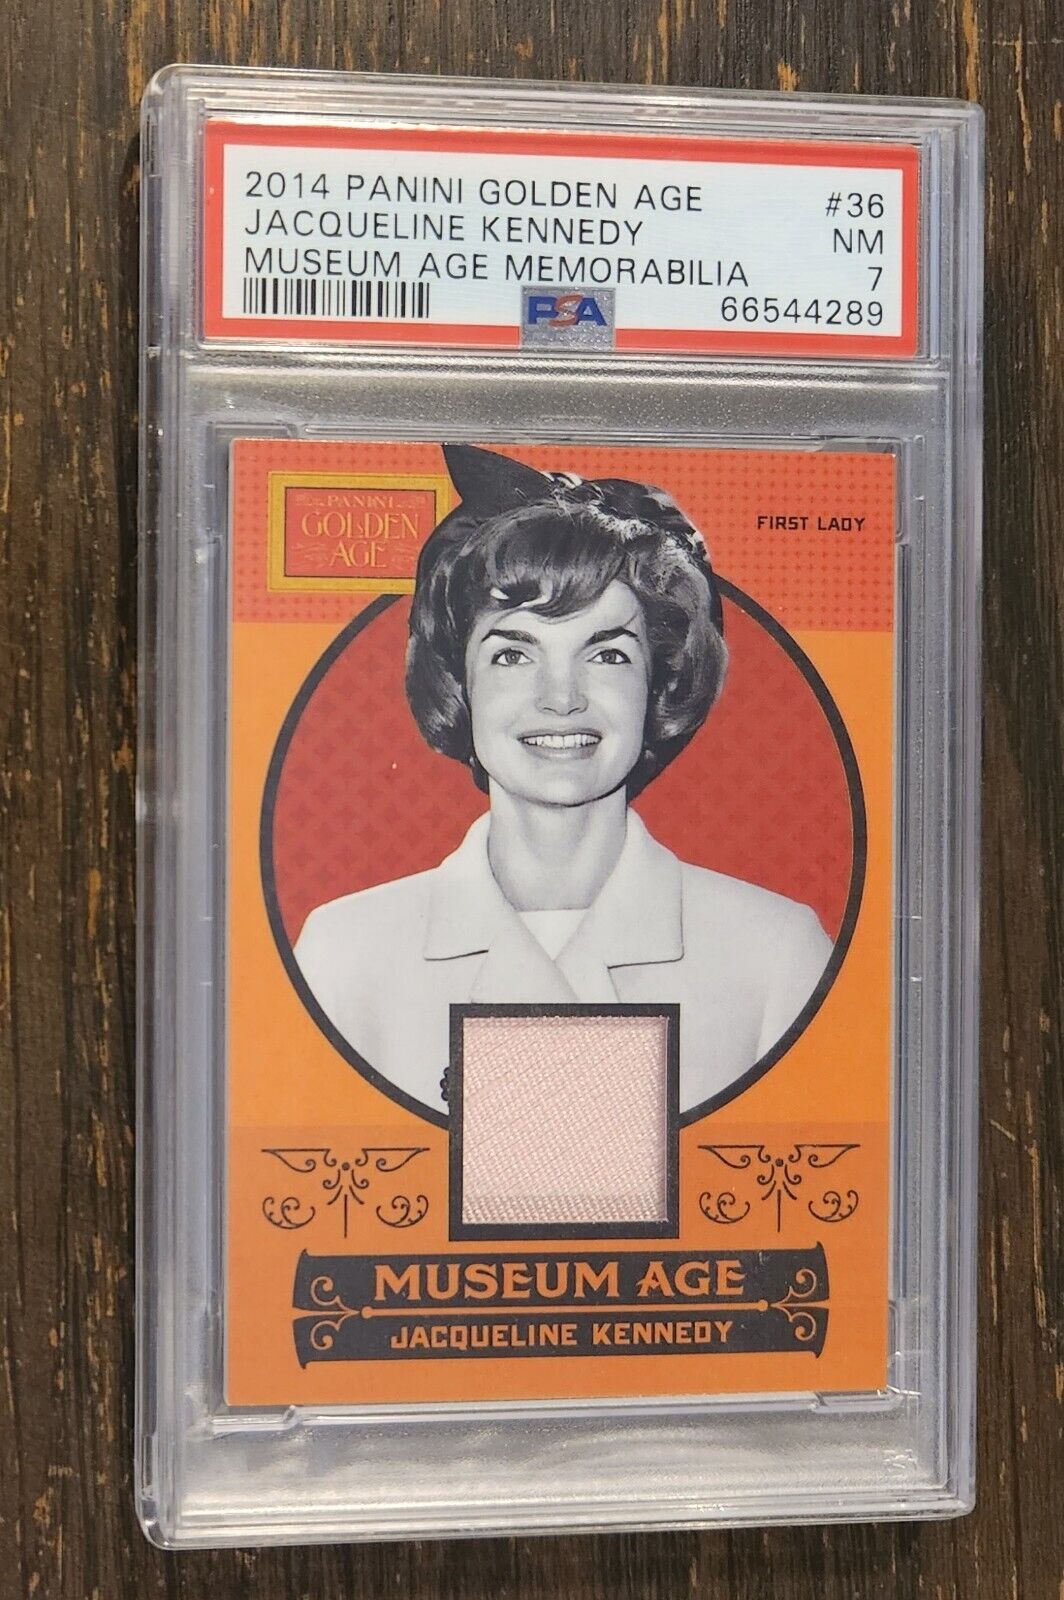 2014 Panini Golden Age - Jacqueline Kennedy Museum Age First Lady Relic PSA 7